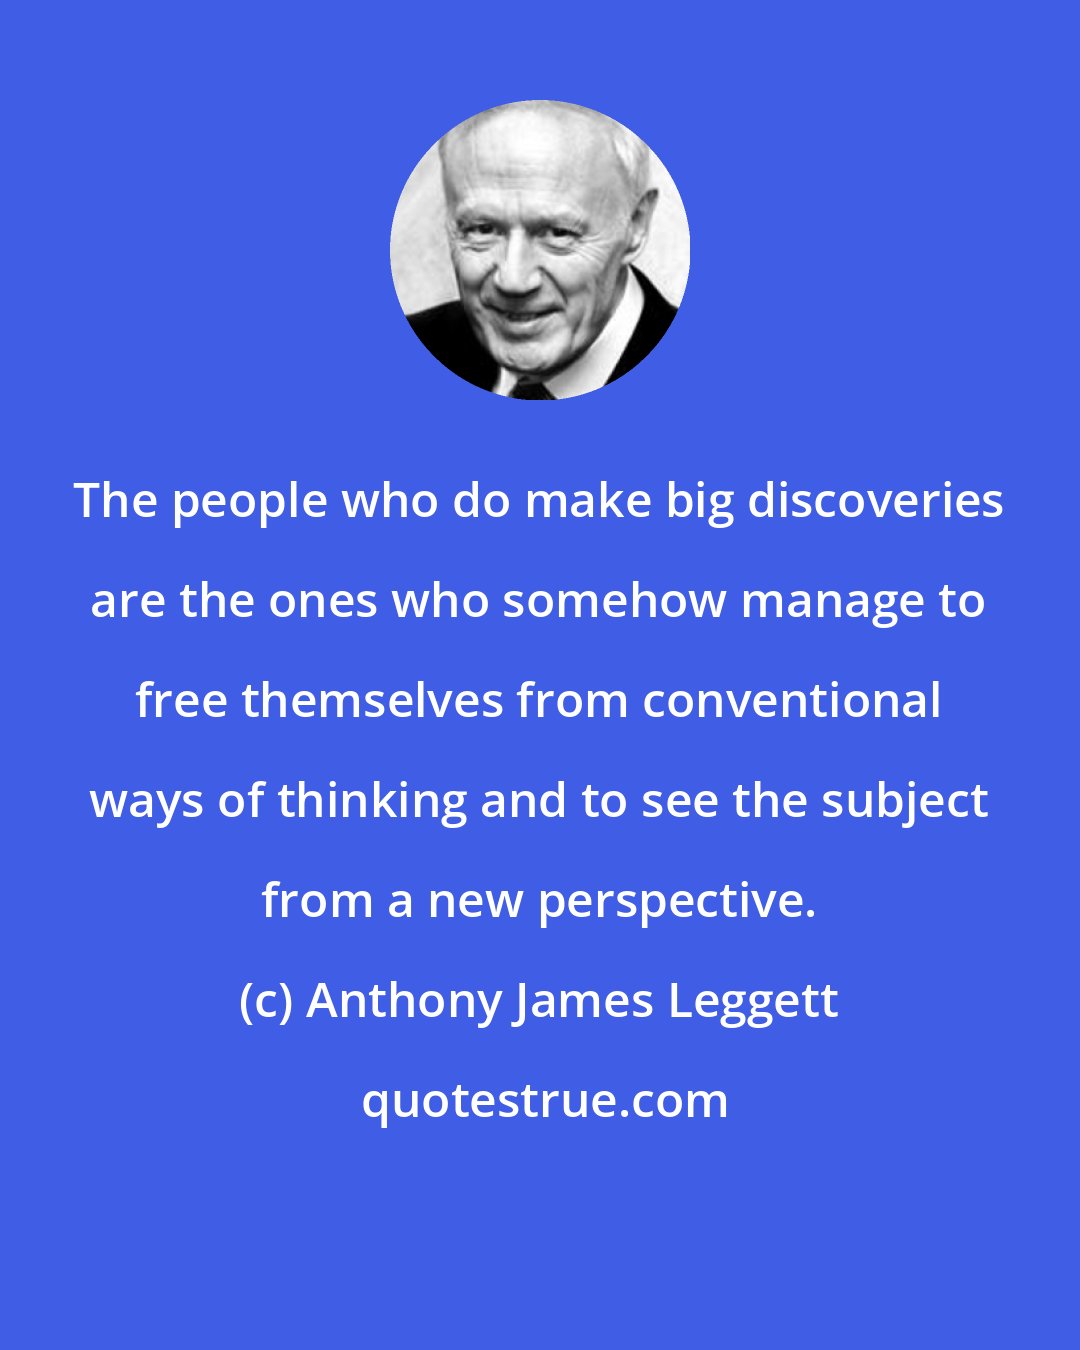 Anthony James Leggett: The people who do make big discoveries are the ones who somehow manage to free themselves from conventional ways of thinking and to see the subject from a new perspective.